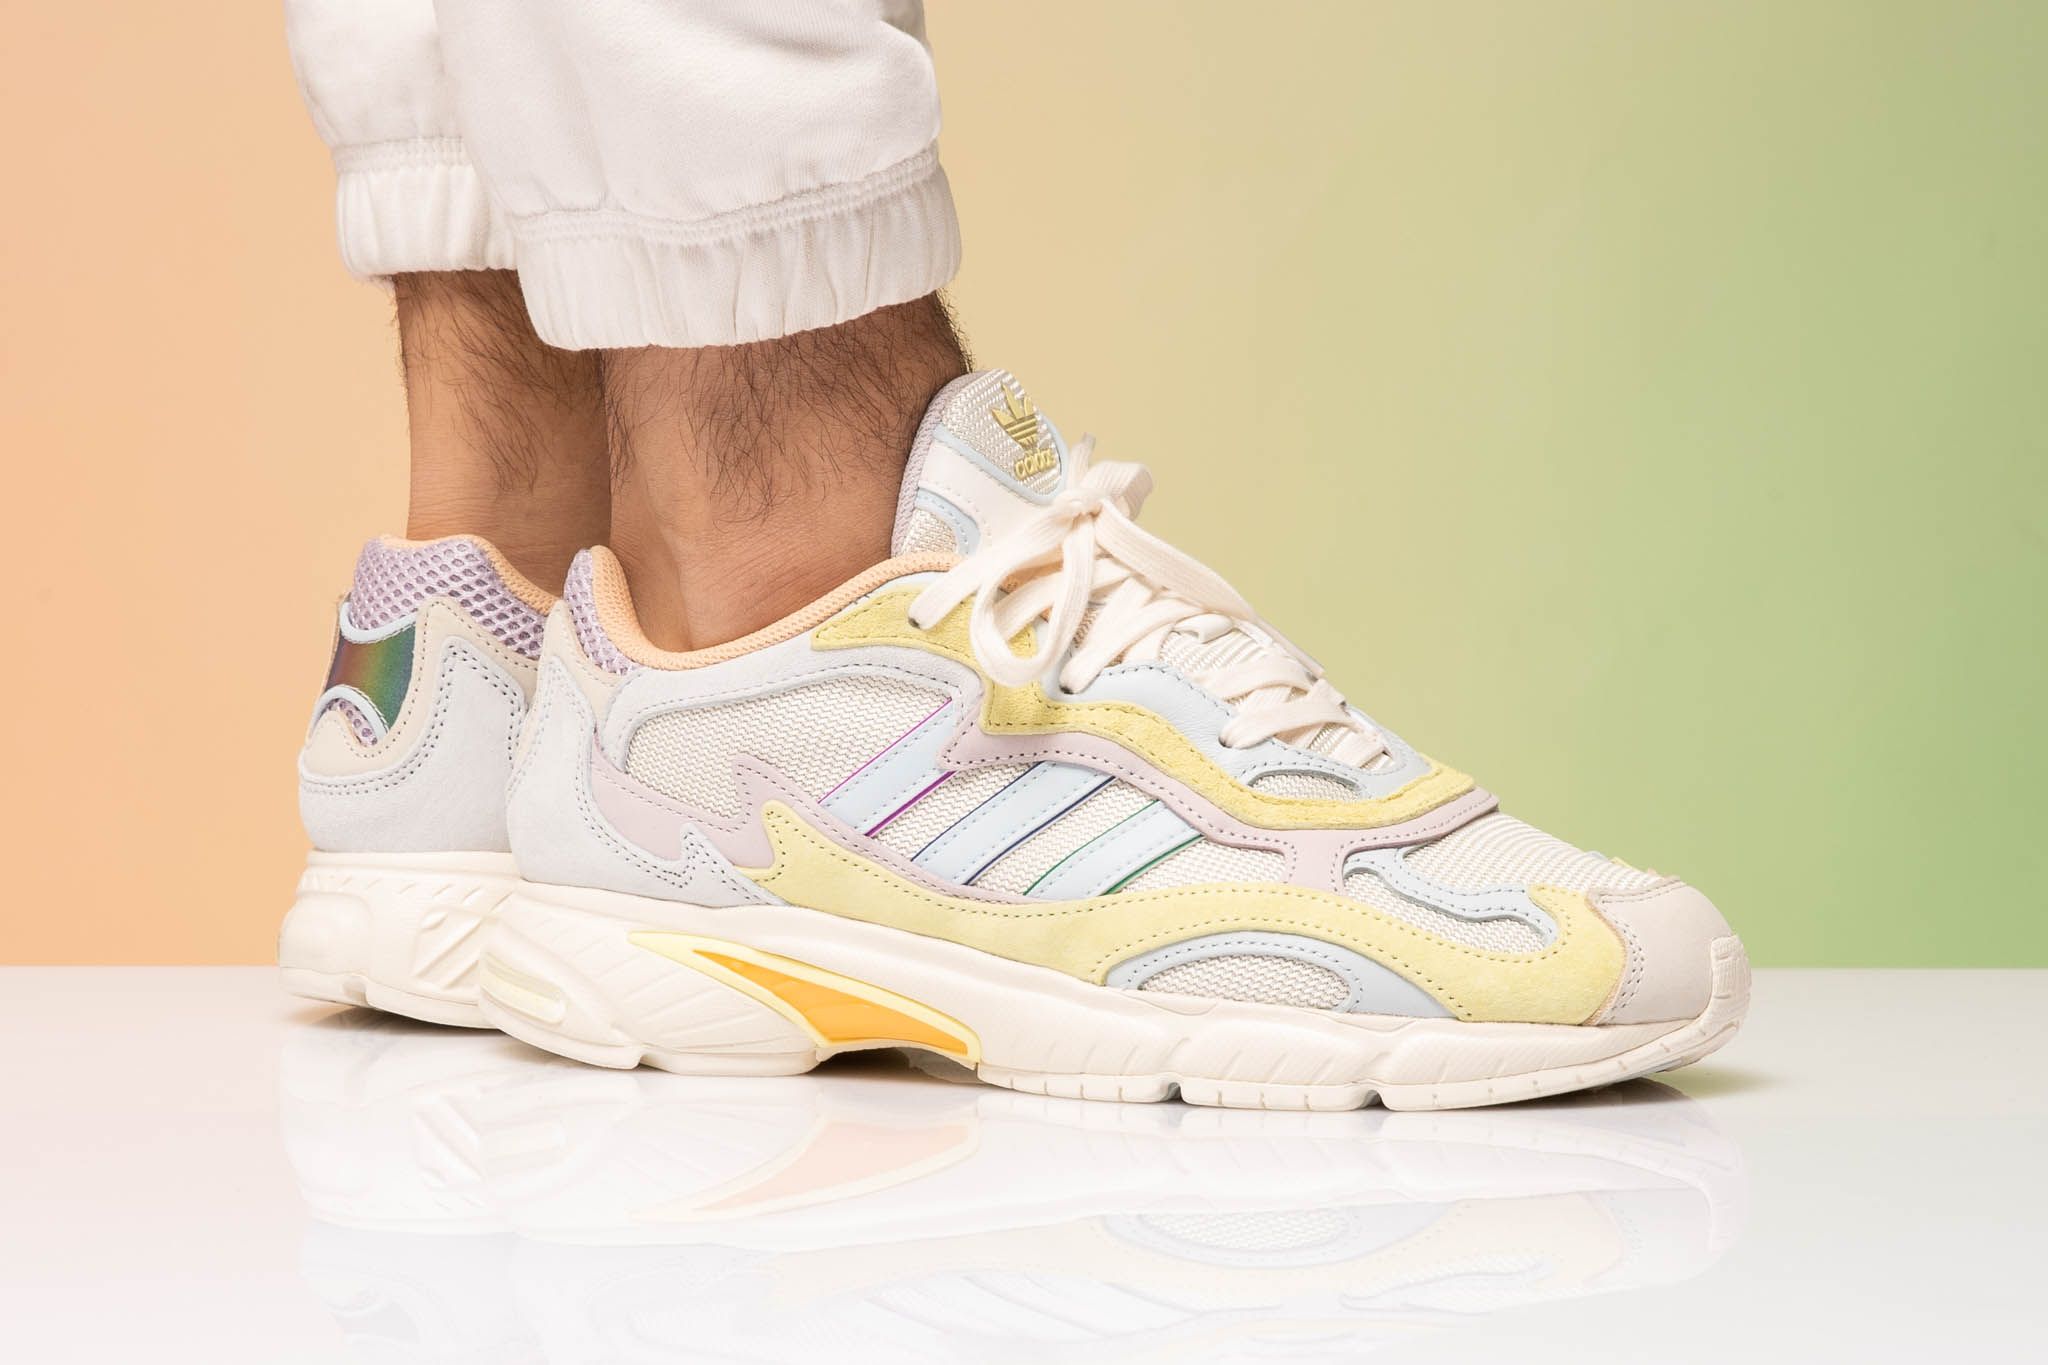 Titolo on Twitter: "the PRIDE Adidas Temper Run "Off White/ Blue Tint/Ice Yellow" now available ➡️ https://t.co/MPSPObEhwu UK 3.5 (36) - UK 11 (46)⁠ style code 🔎 EG1077⁠ #adidas #titolo #